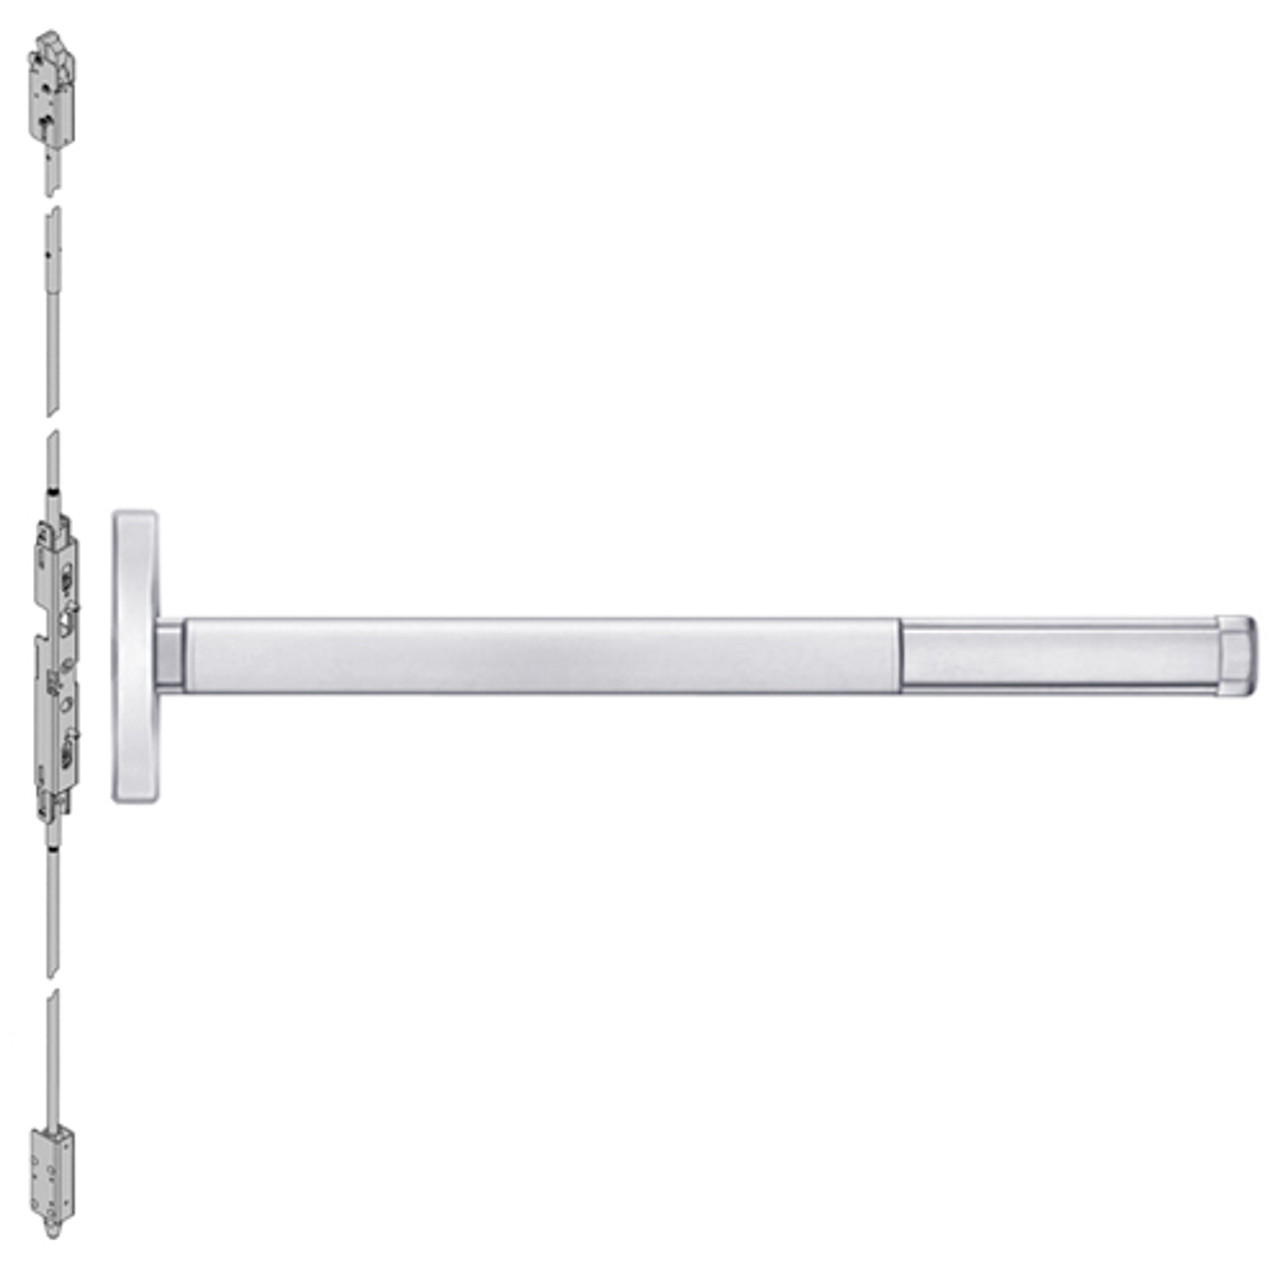 ELRFL2614LBR-625-36 PHI 2600 Series Fire Rated Concealed Vertical Rod Exit Device with Electric Latch Retraction Prepped for Lever Always Active in Bright Chrome Finish